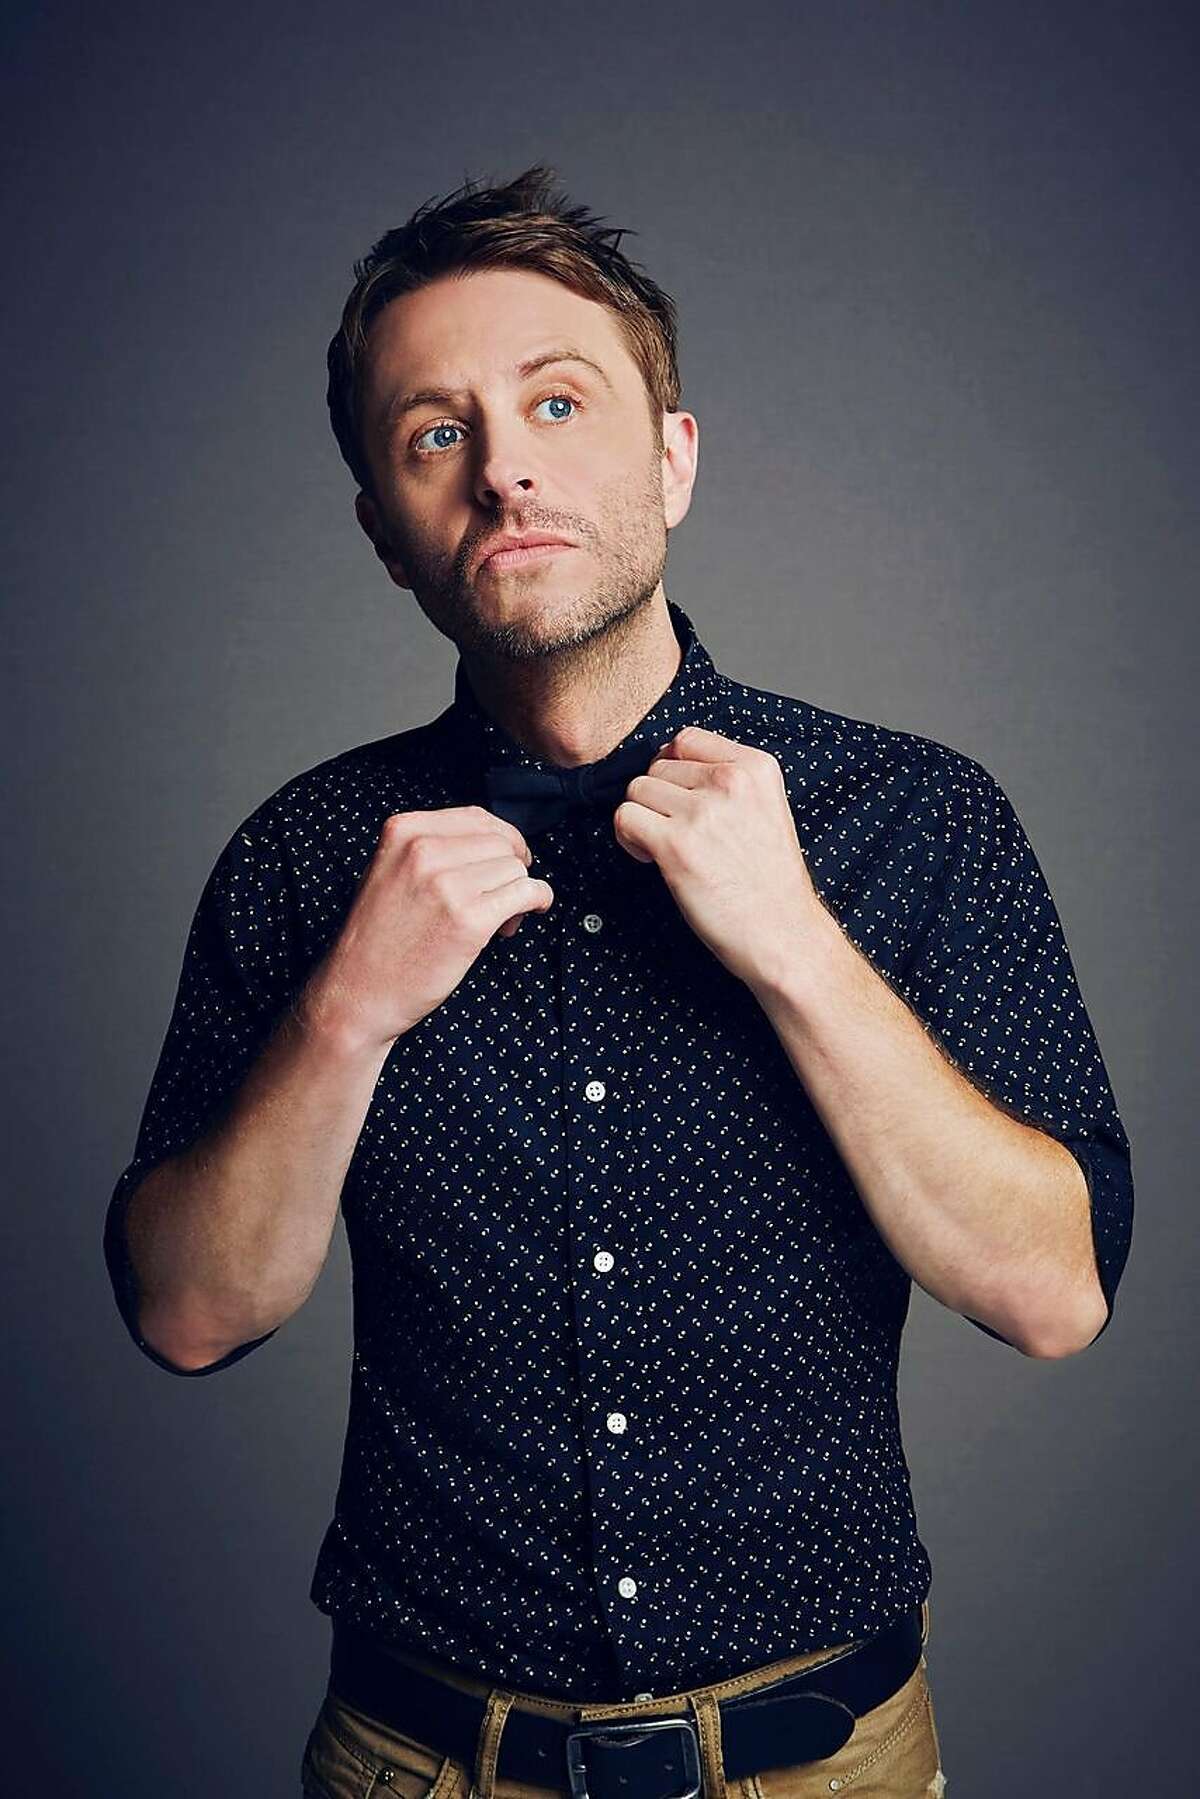 Chris Hardwick is the creator and host of the ID10T festival, set to debut at the Shoreline Amphitheatre in Mountain View on June 24-25, 2017.